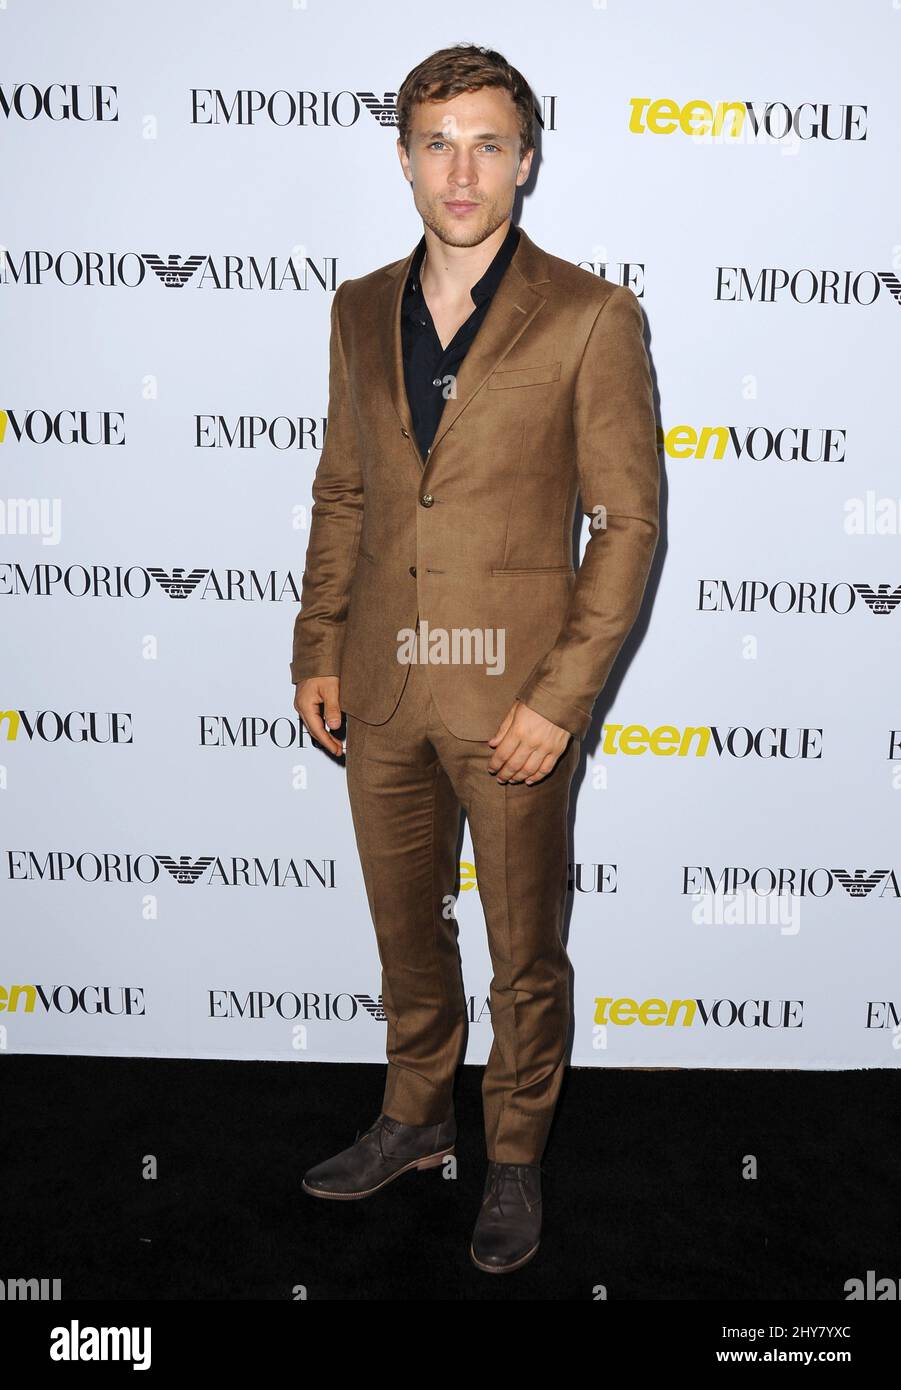 William Moseley attending the 13th Annual Teen Vogue Young Hollywood party in Los Angeles, California. Stock Photo